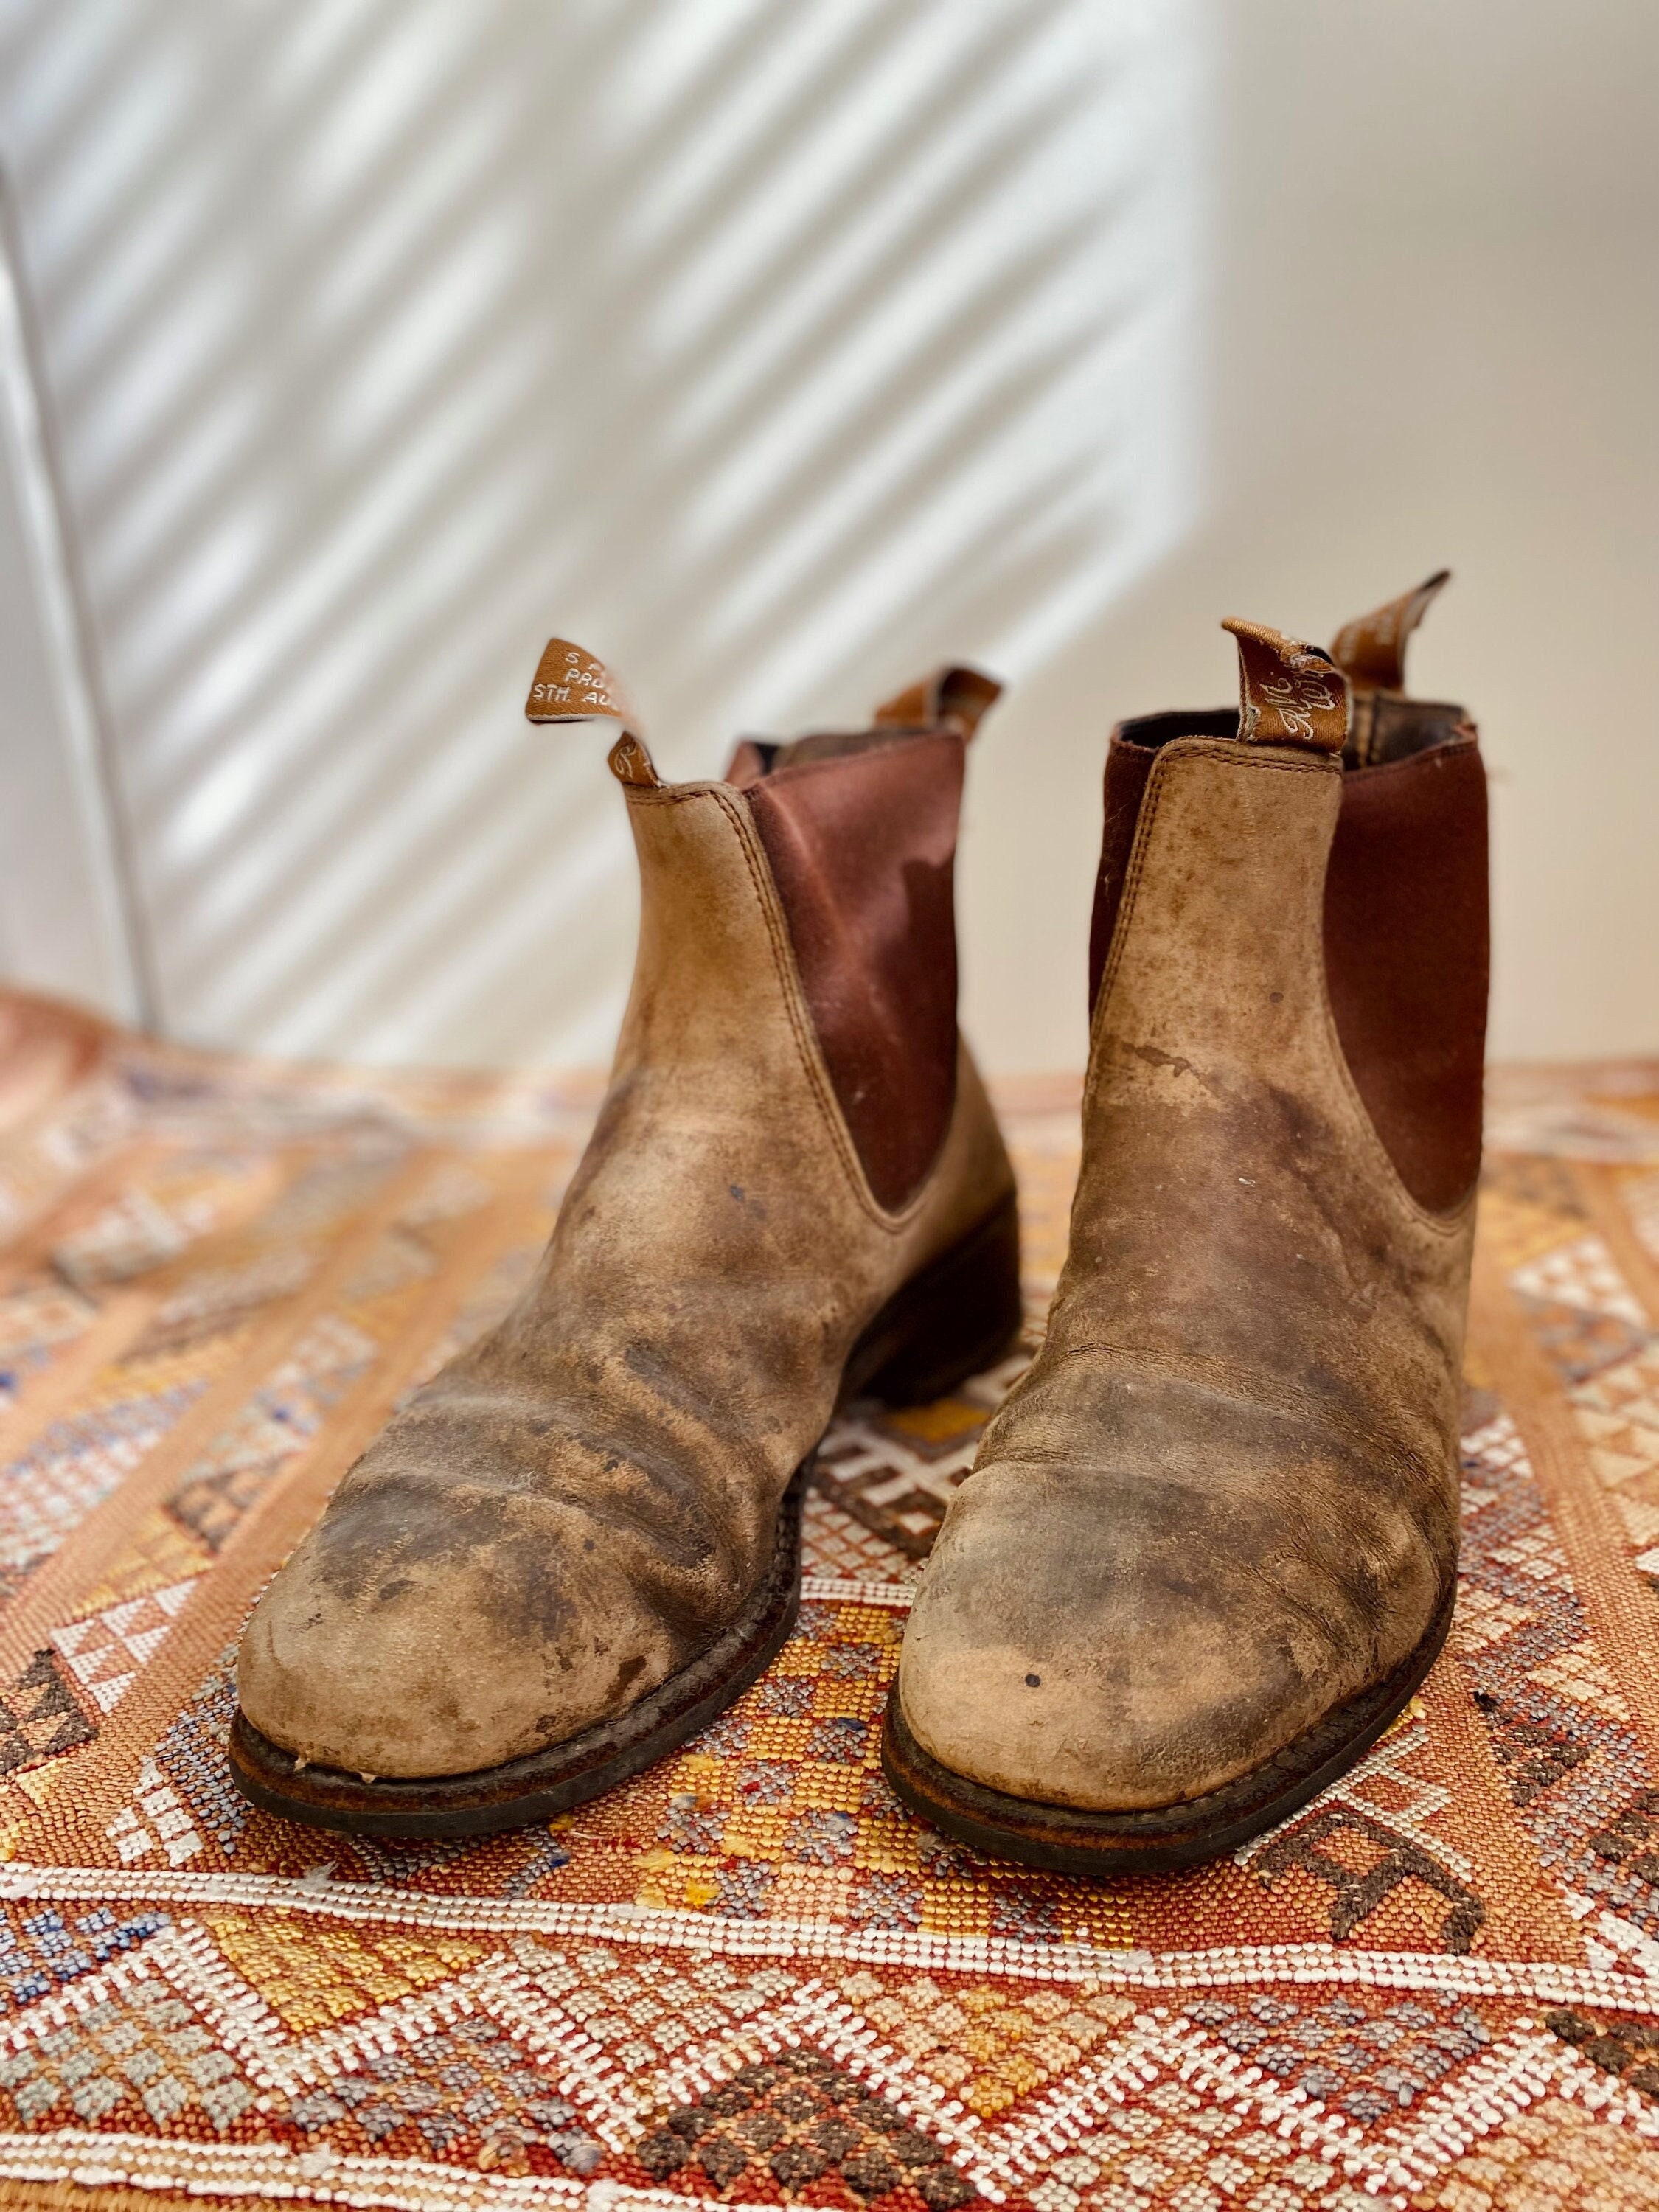 rm williams cowboy boots